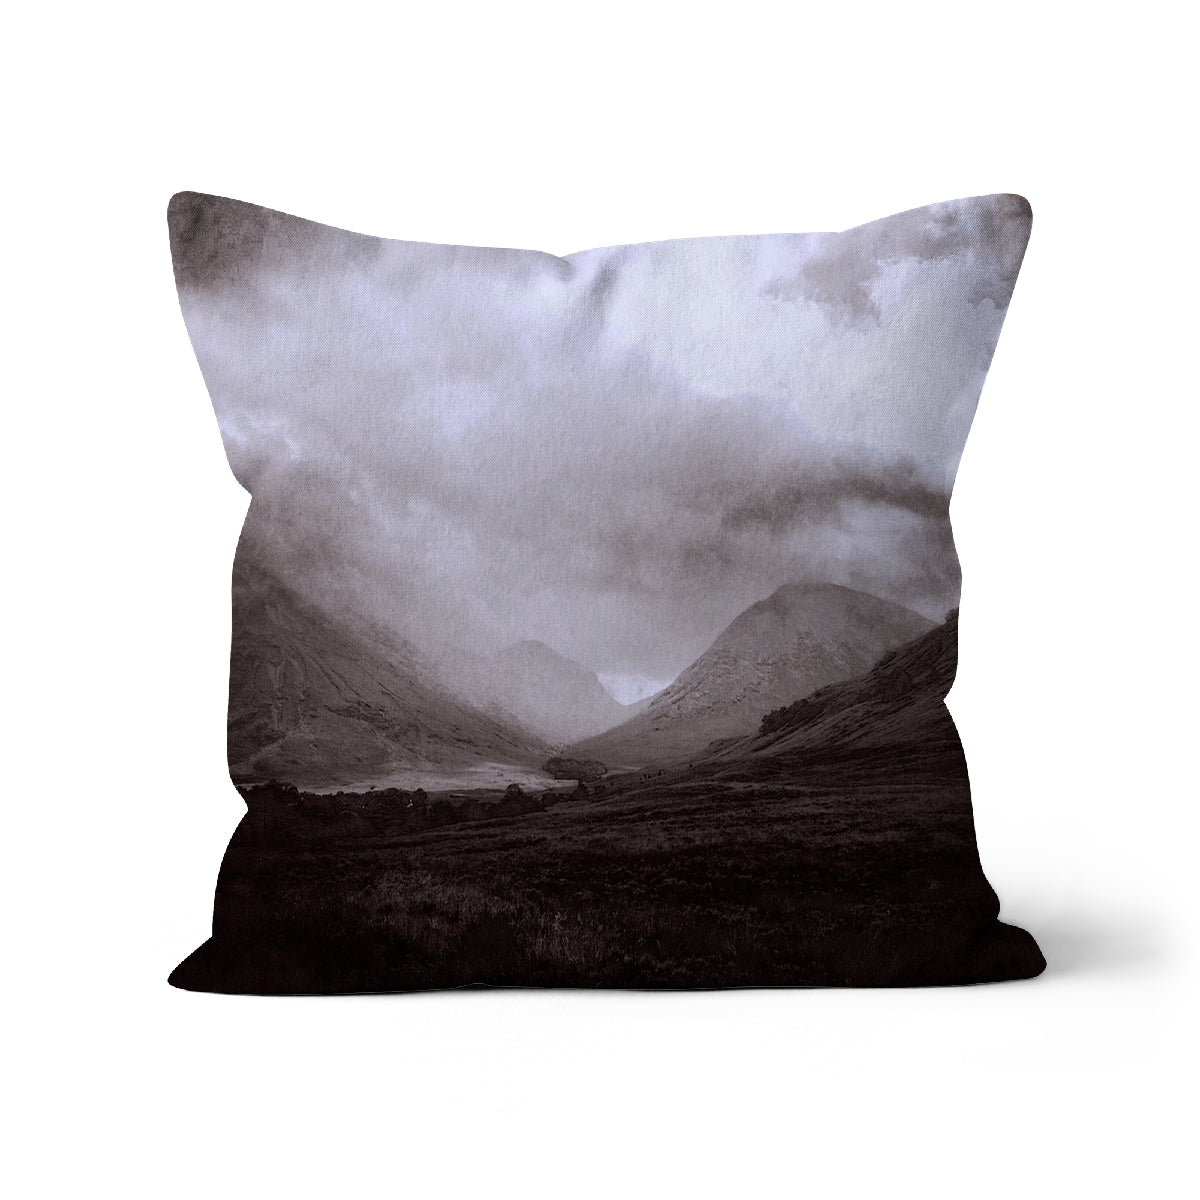 Glencoe Mist Art Gifts Cushion-Cushions-Glencoe Art Gallery-Faux Suede-24"x24"-Paintings, Prints, Homeware, Art Gifts From Scotland By Scottish Artist Kevin Hunter